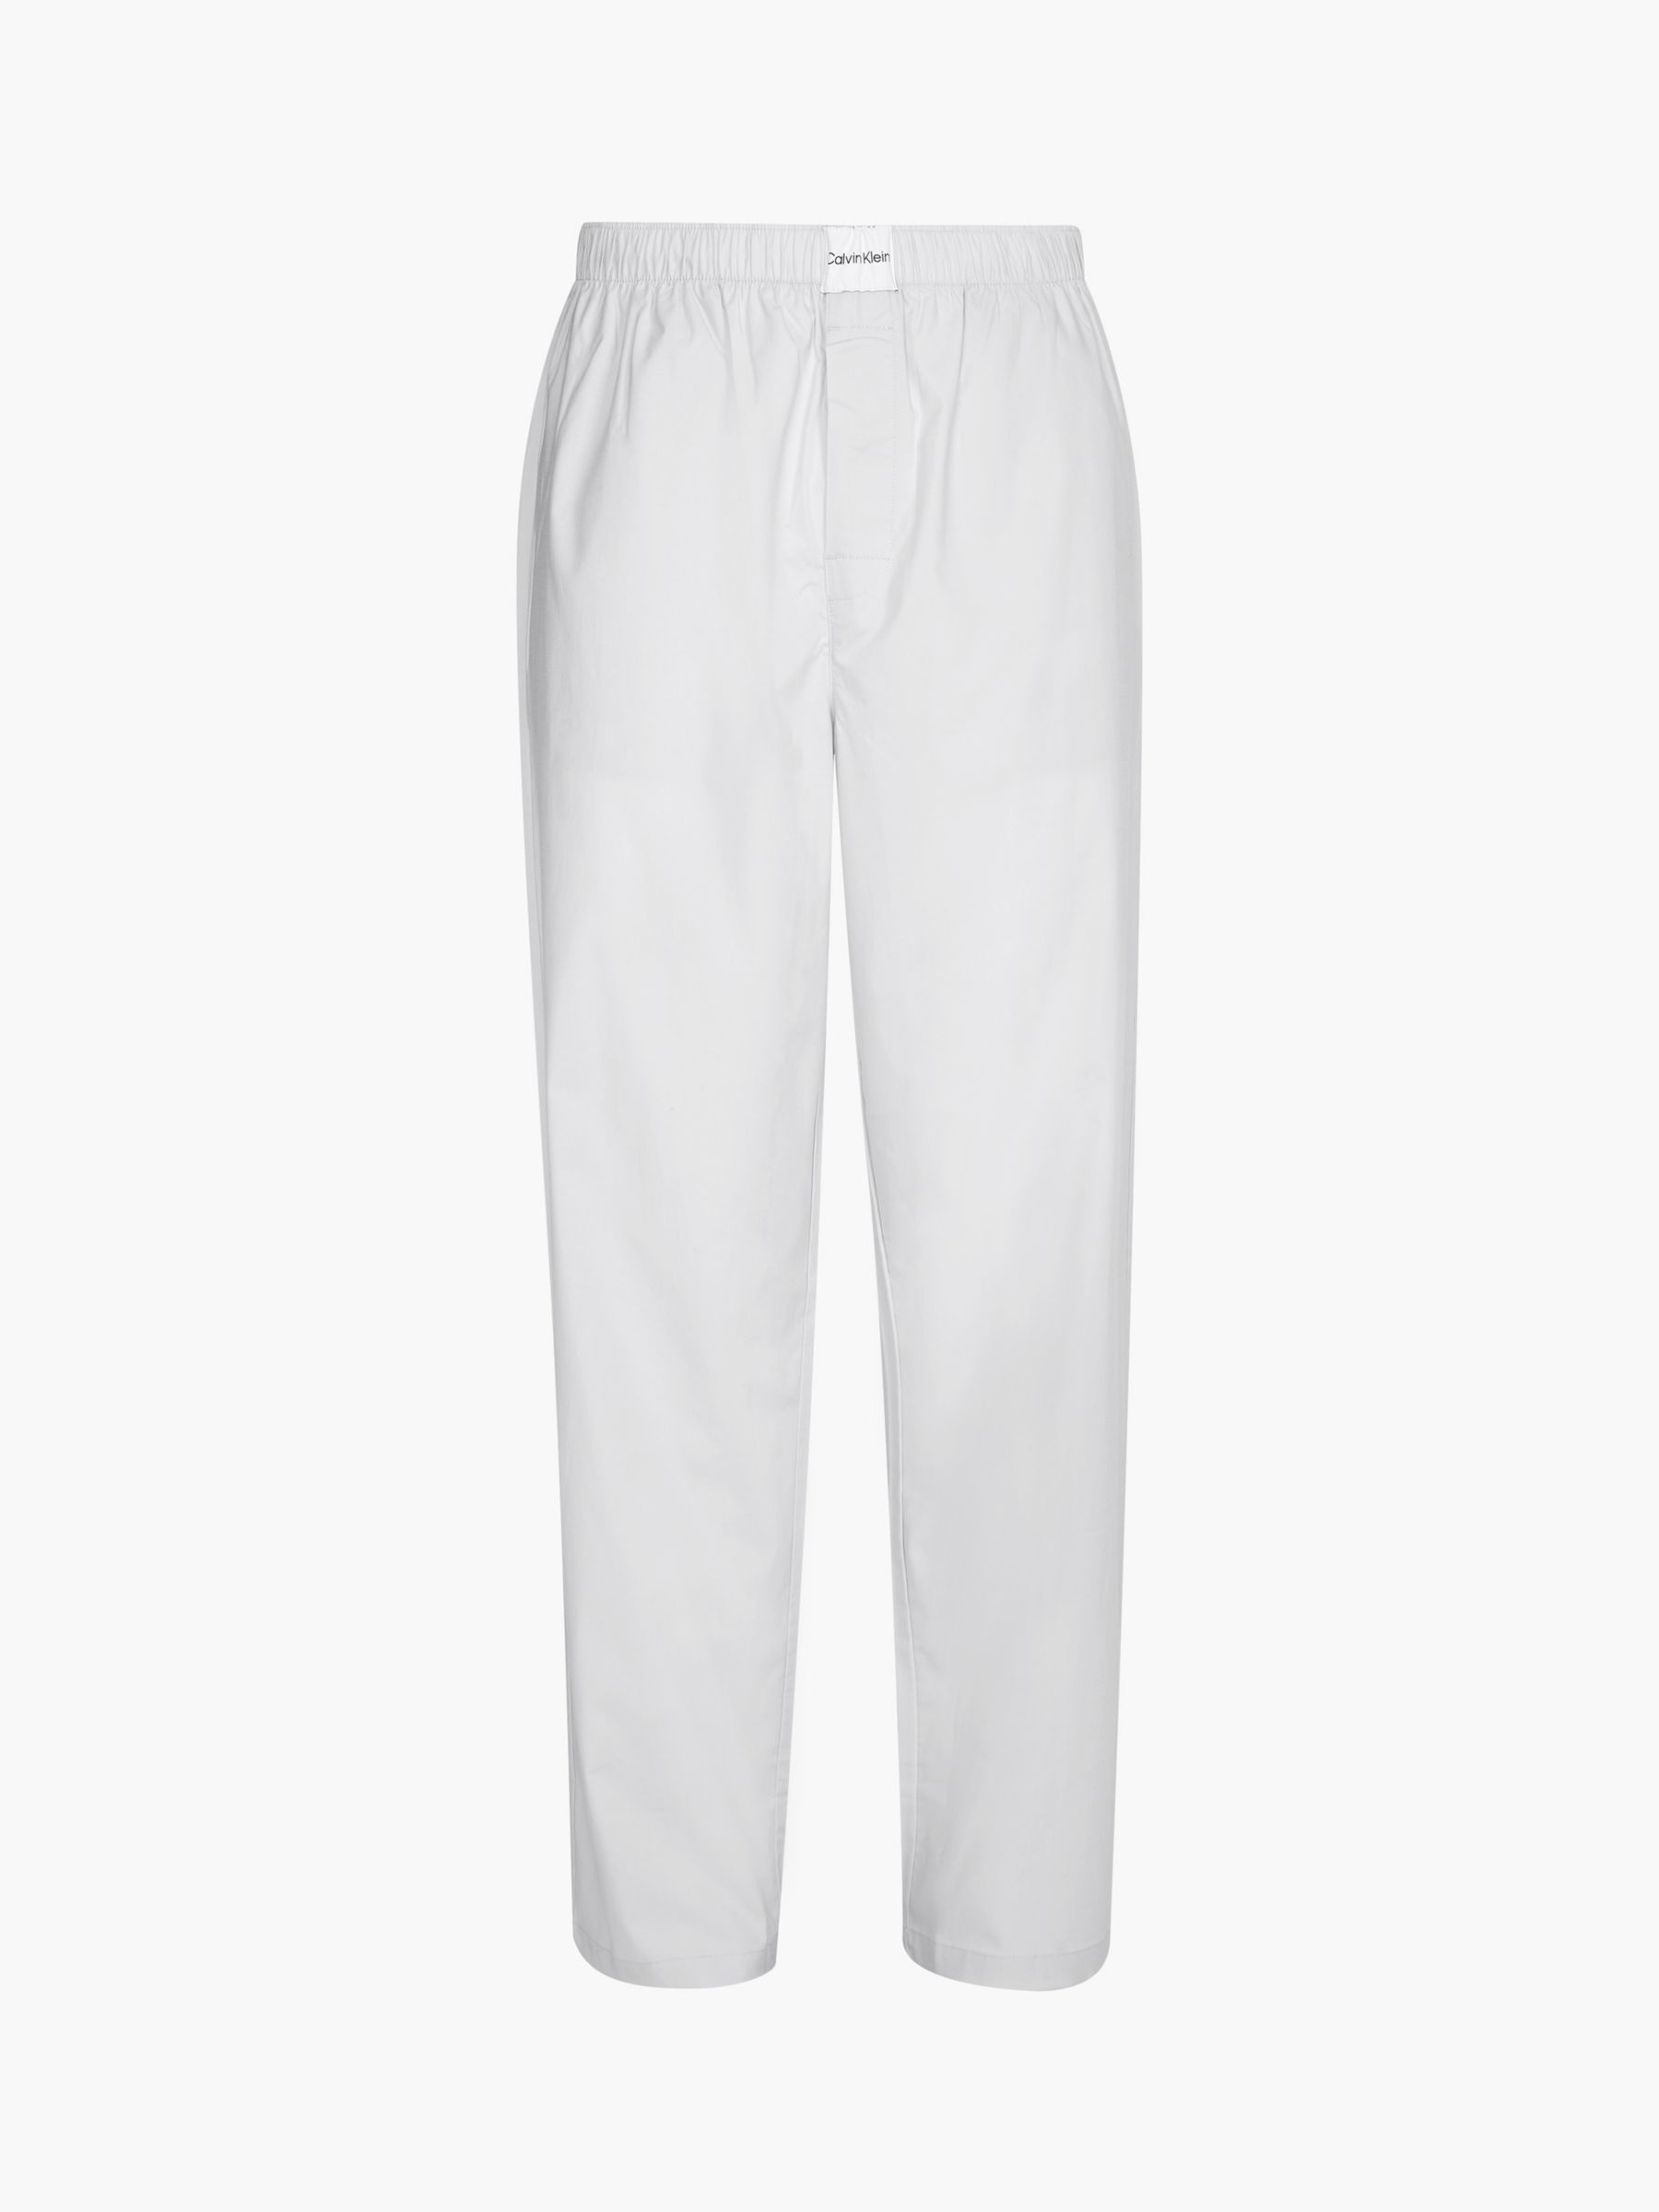 Buy Calvin Klein Pure Cotton Sleep Trousers Online at johnlewis.com